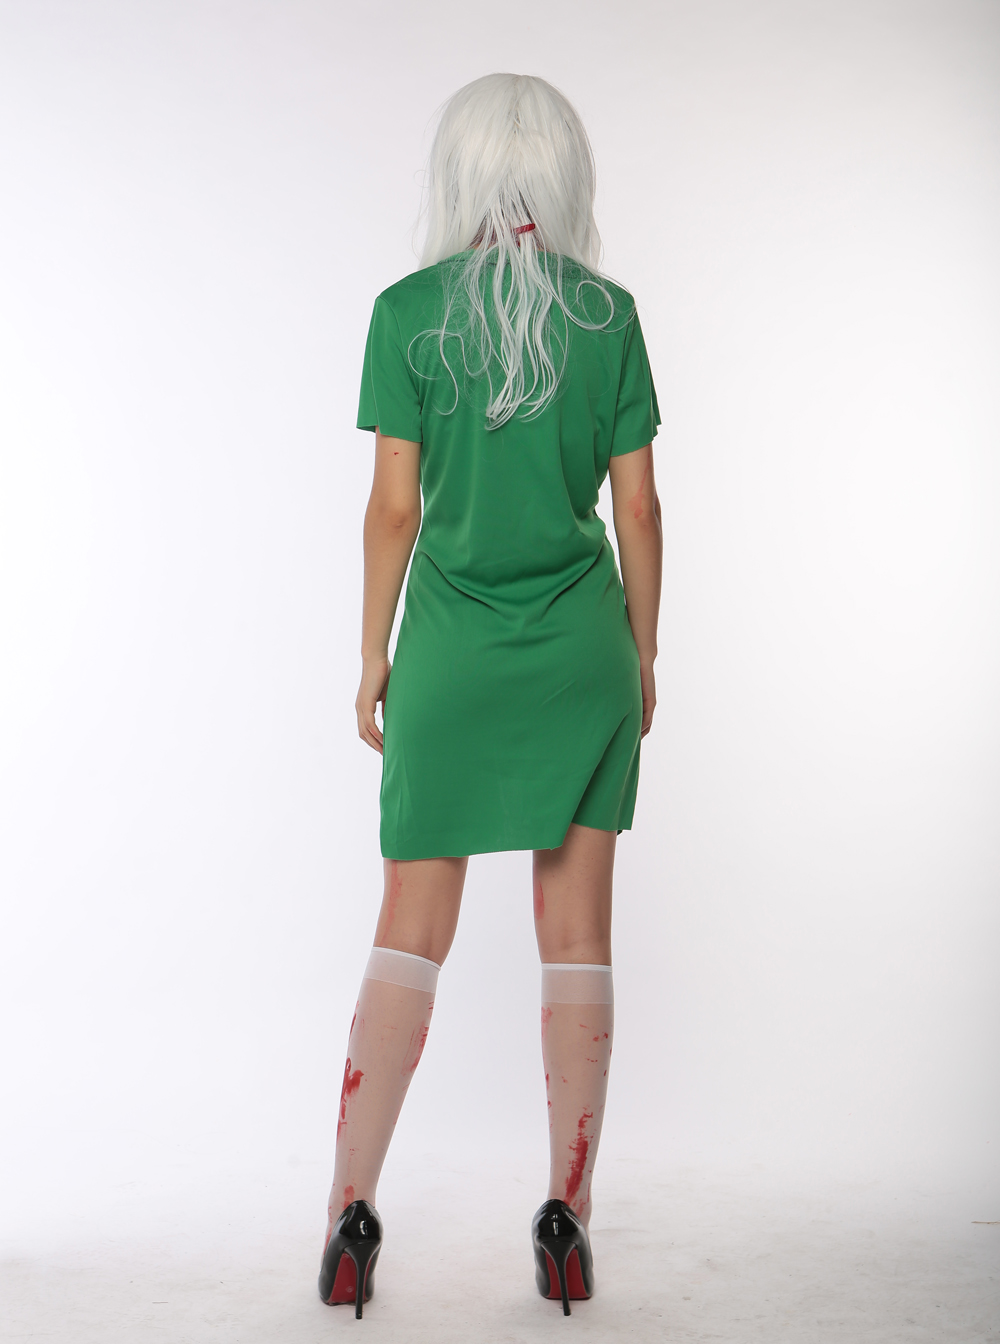 F1720 halloween green zombie costume,it comes with dress,mask